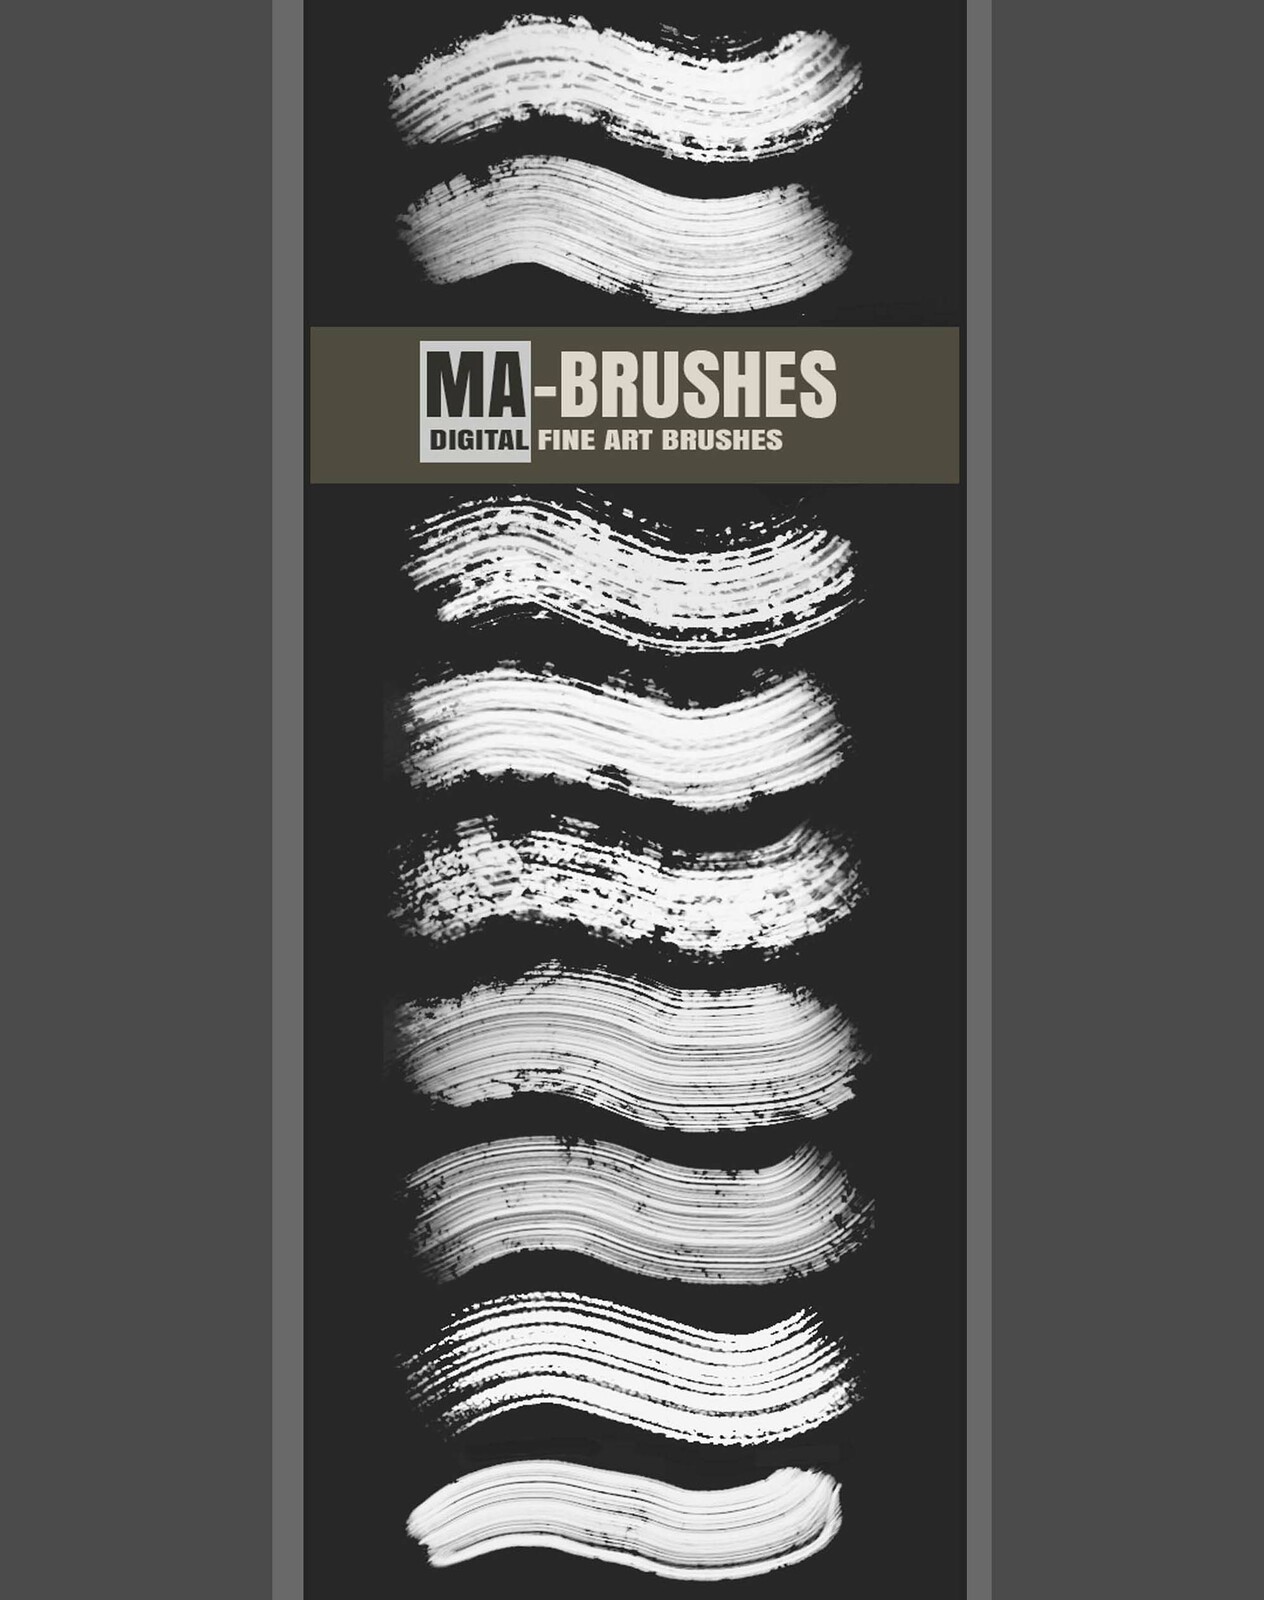 Photoshop Painting Brushes with Oil Texture ++ MA-BRUSHES